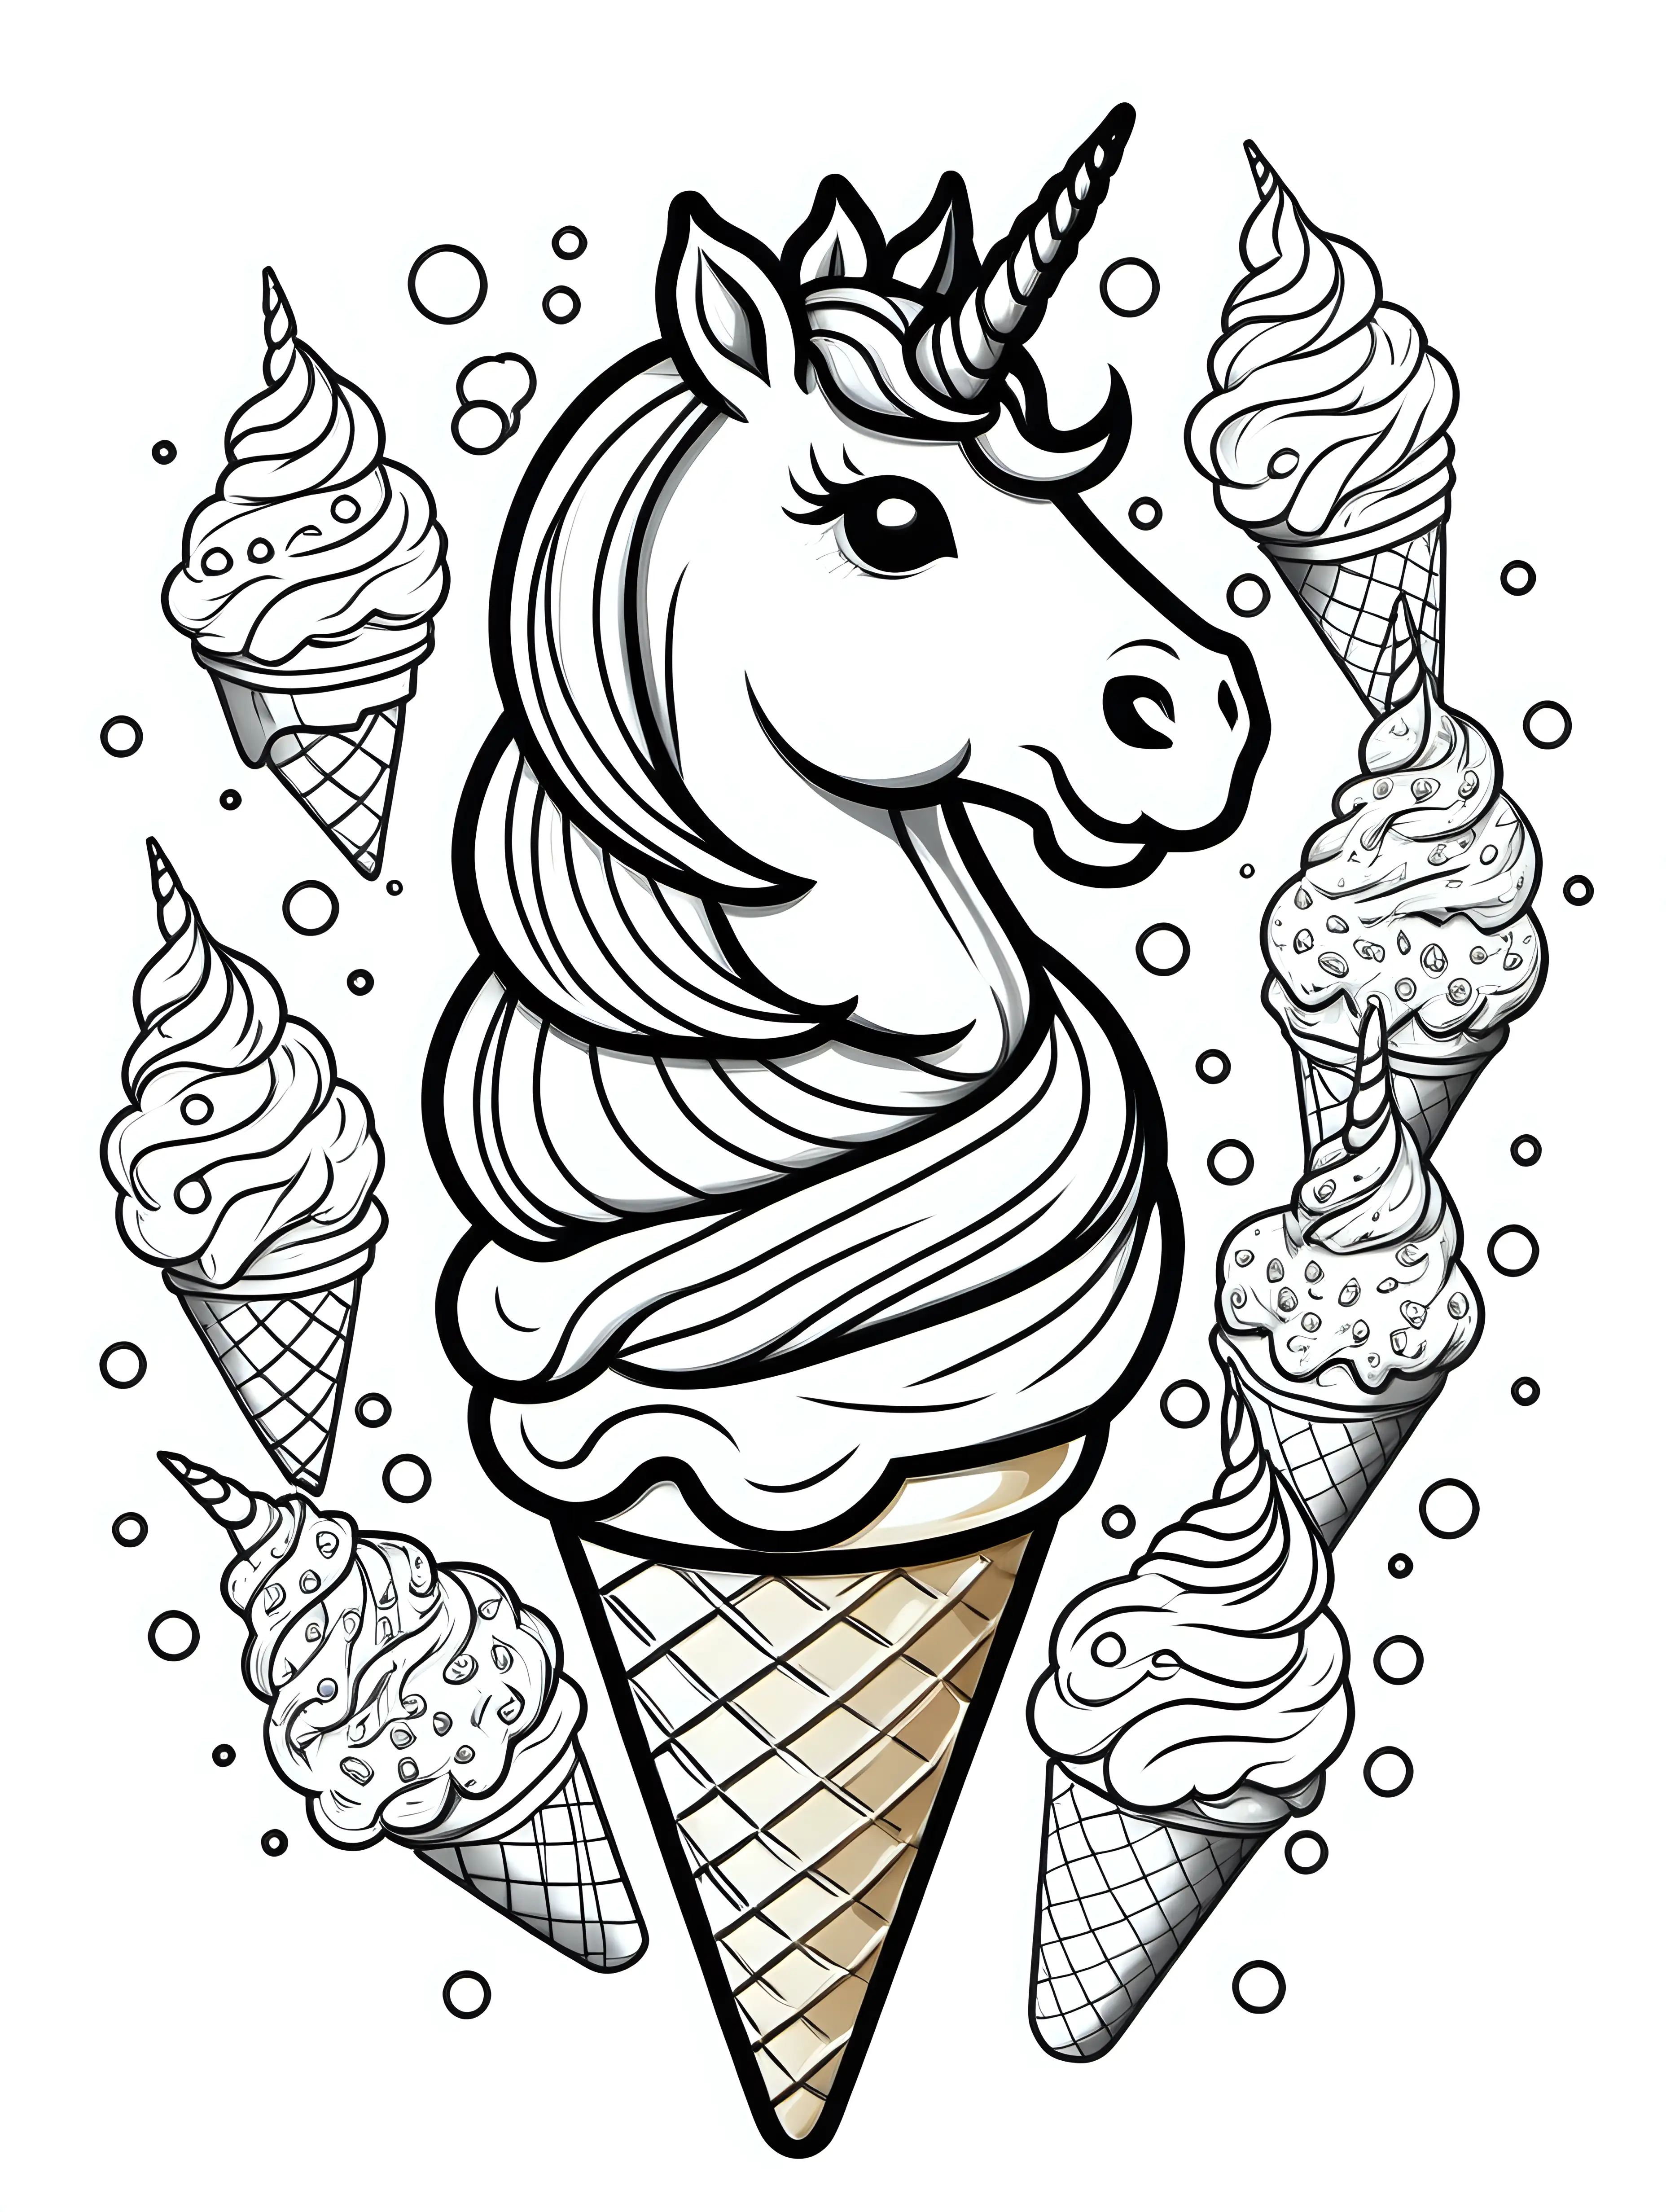 create a coloring page of a unicorn in an icecream, black outlines, no shading
